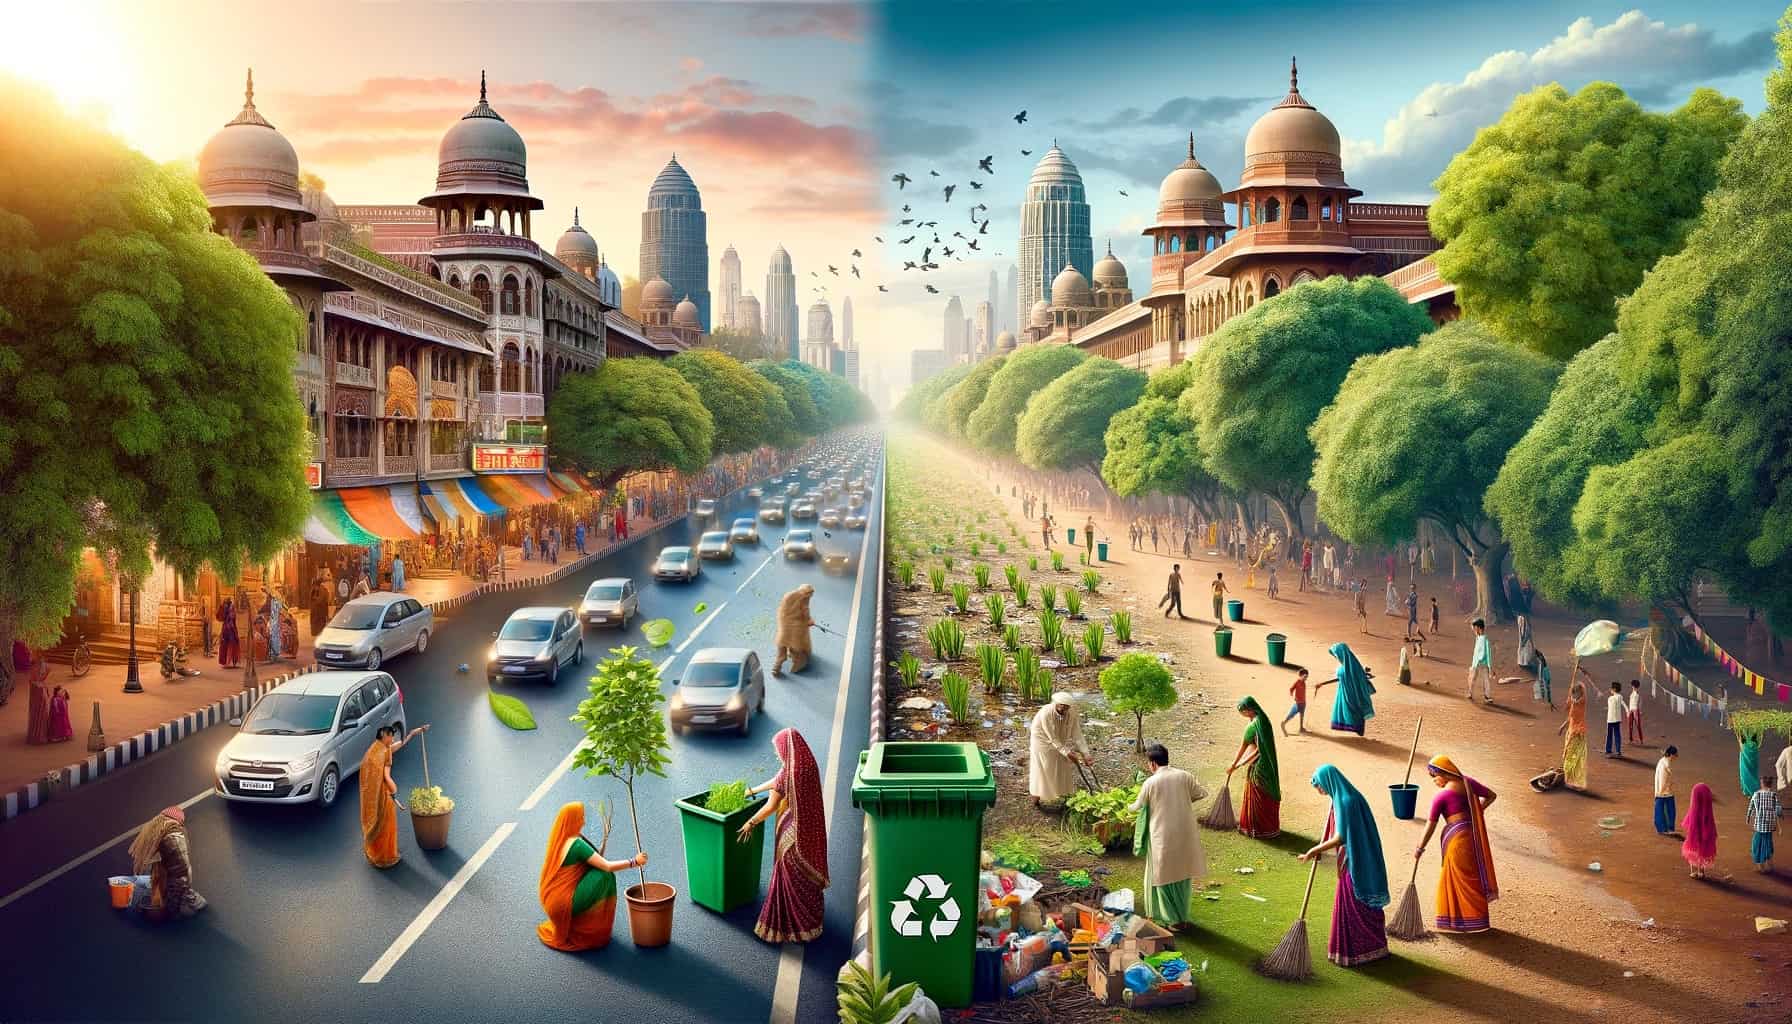 Green India clean India